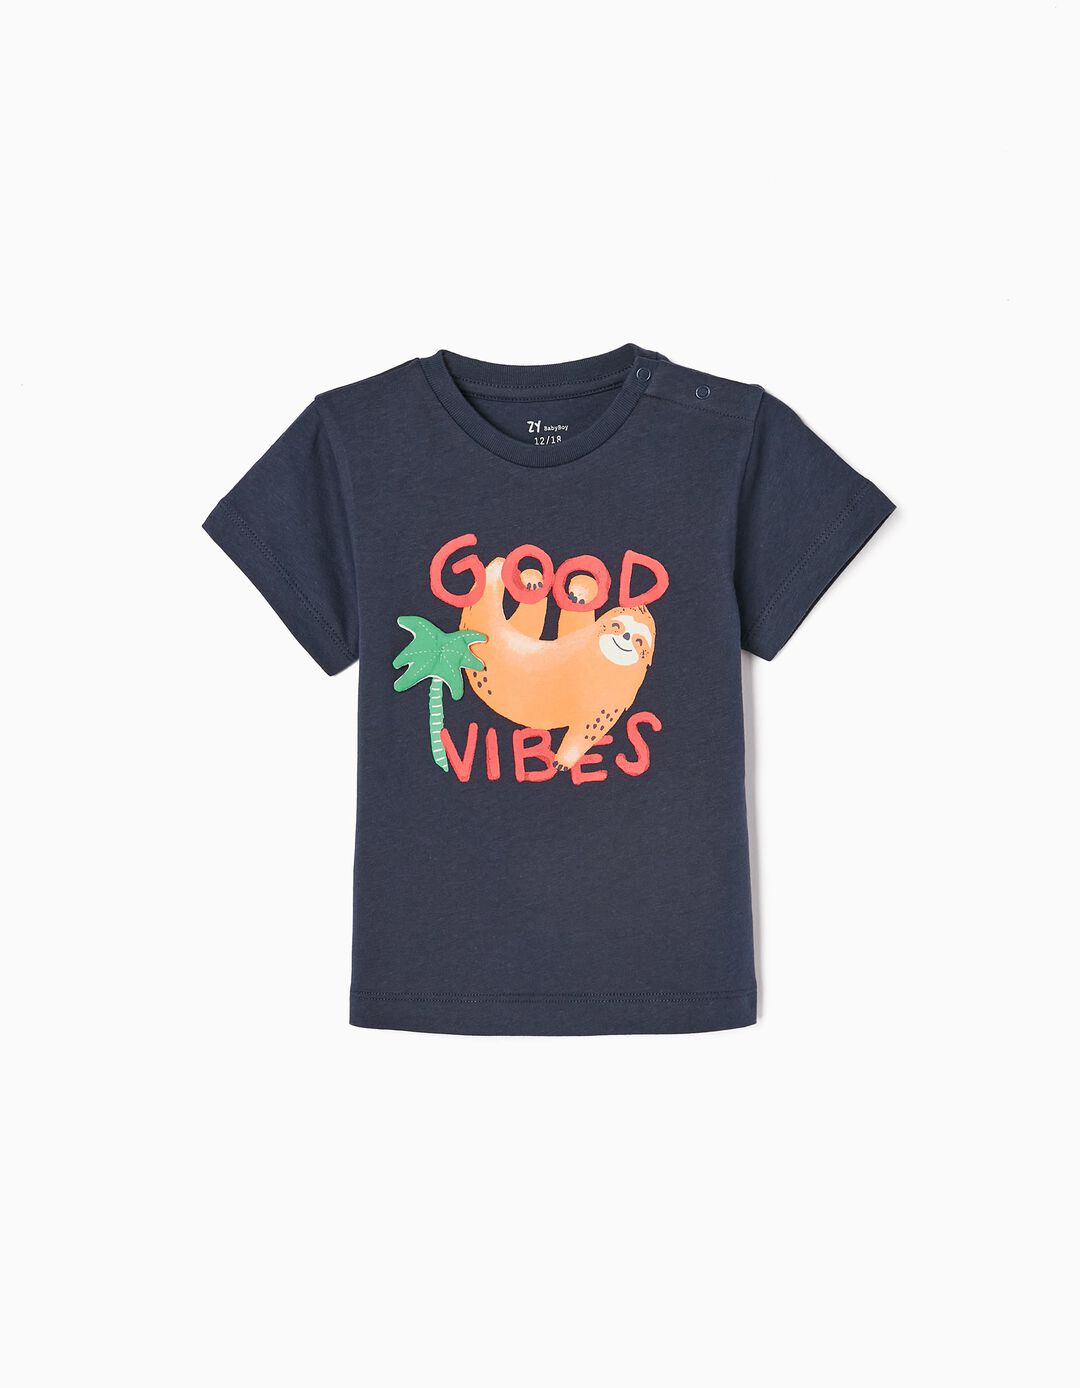 Printed Cotton T-shirt for Baby Boys 'Good Vibes', Dark Blue